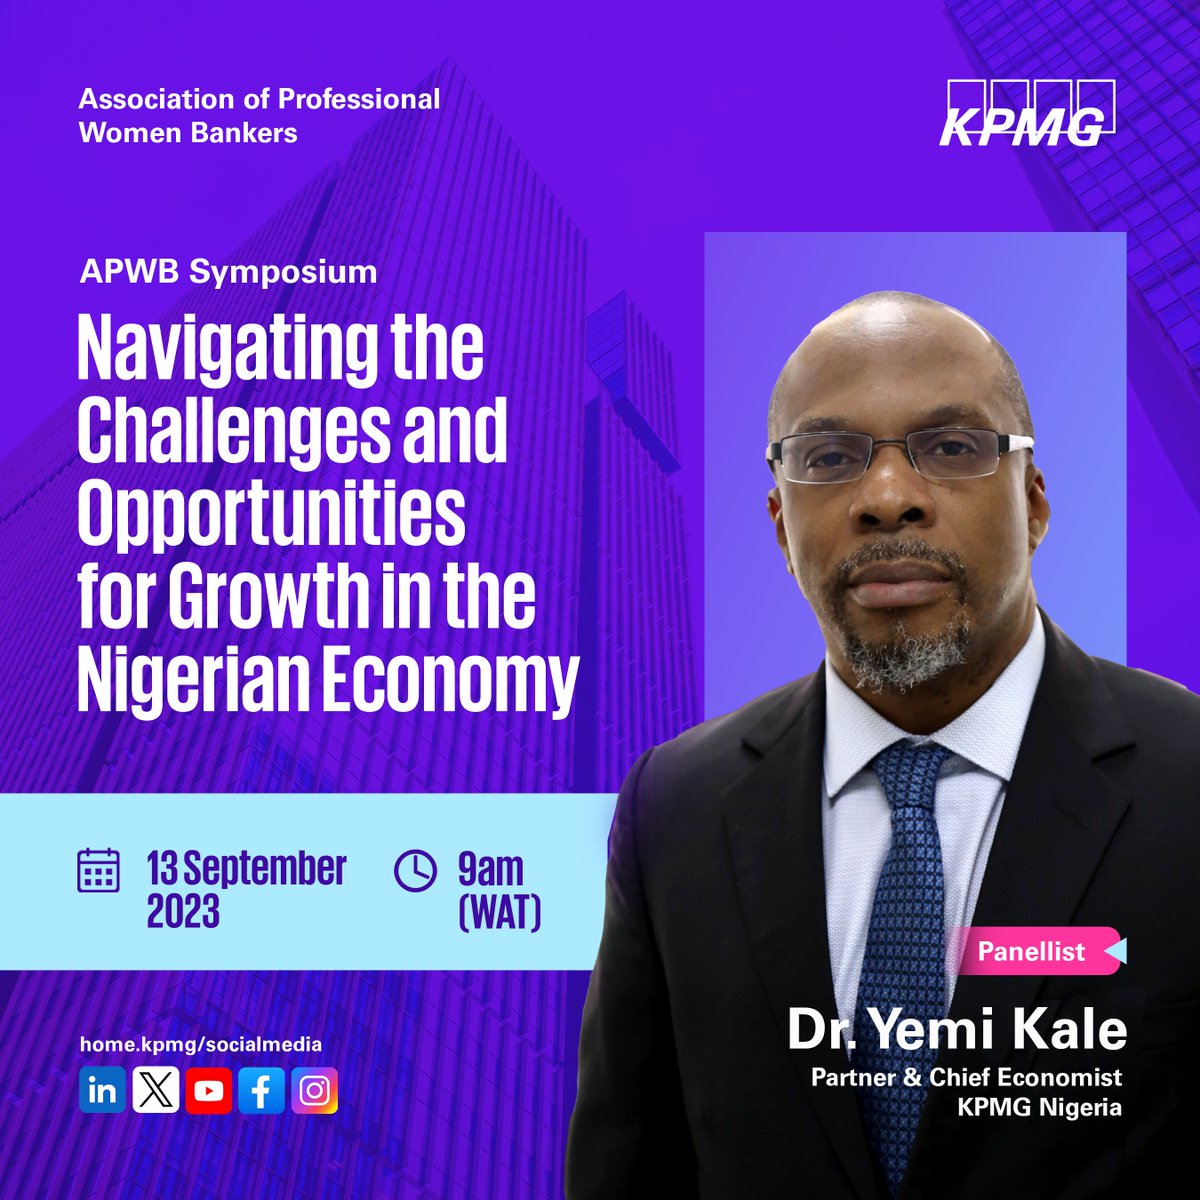 Today, 13 September 2023 at 9am (WAT), Dr. Yemi Kale, Partner and Chief Economist, KPMG Nigeria, will serve as a panellist at the Association of Professional Women Bankers (APWB) symposium.